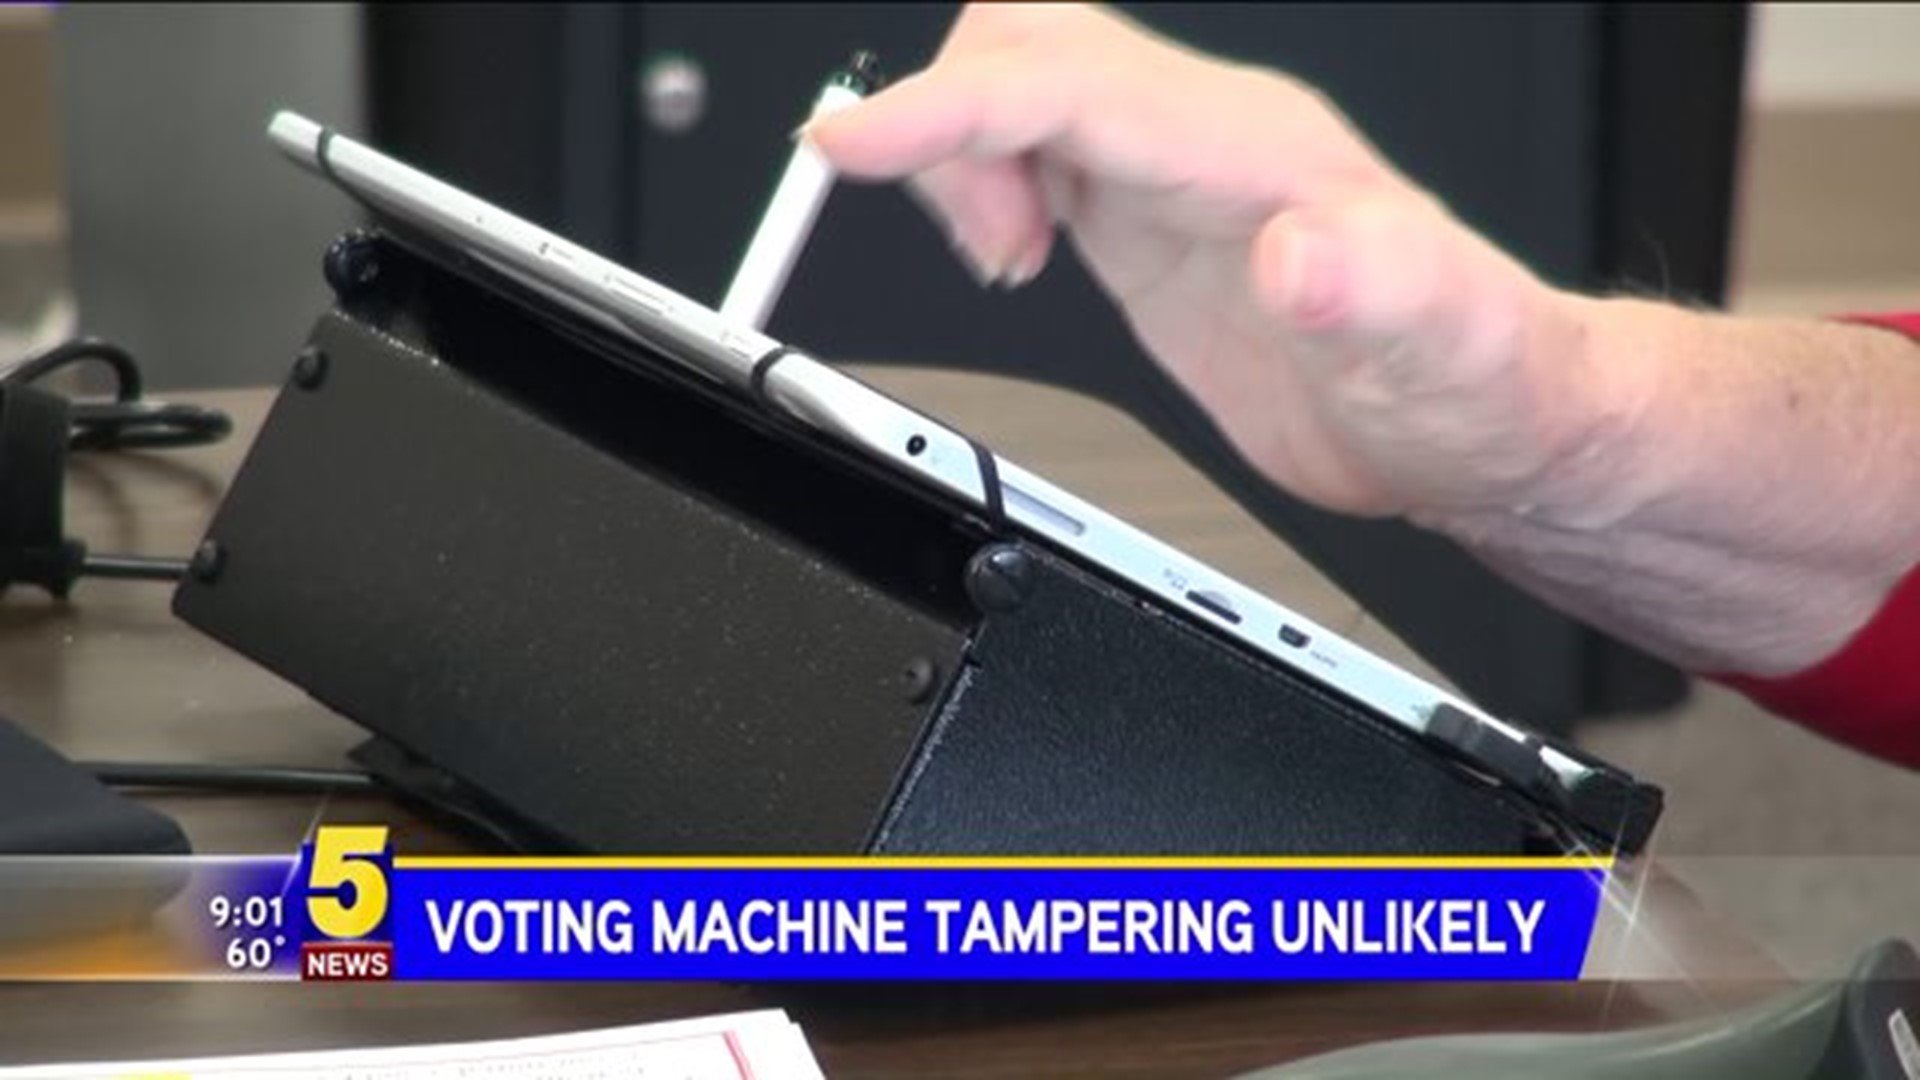 NWA Election Officials Think Election Tampering Is Unlikely